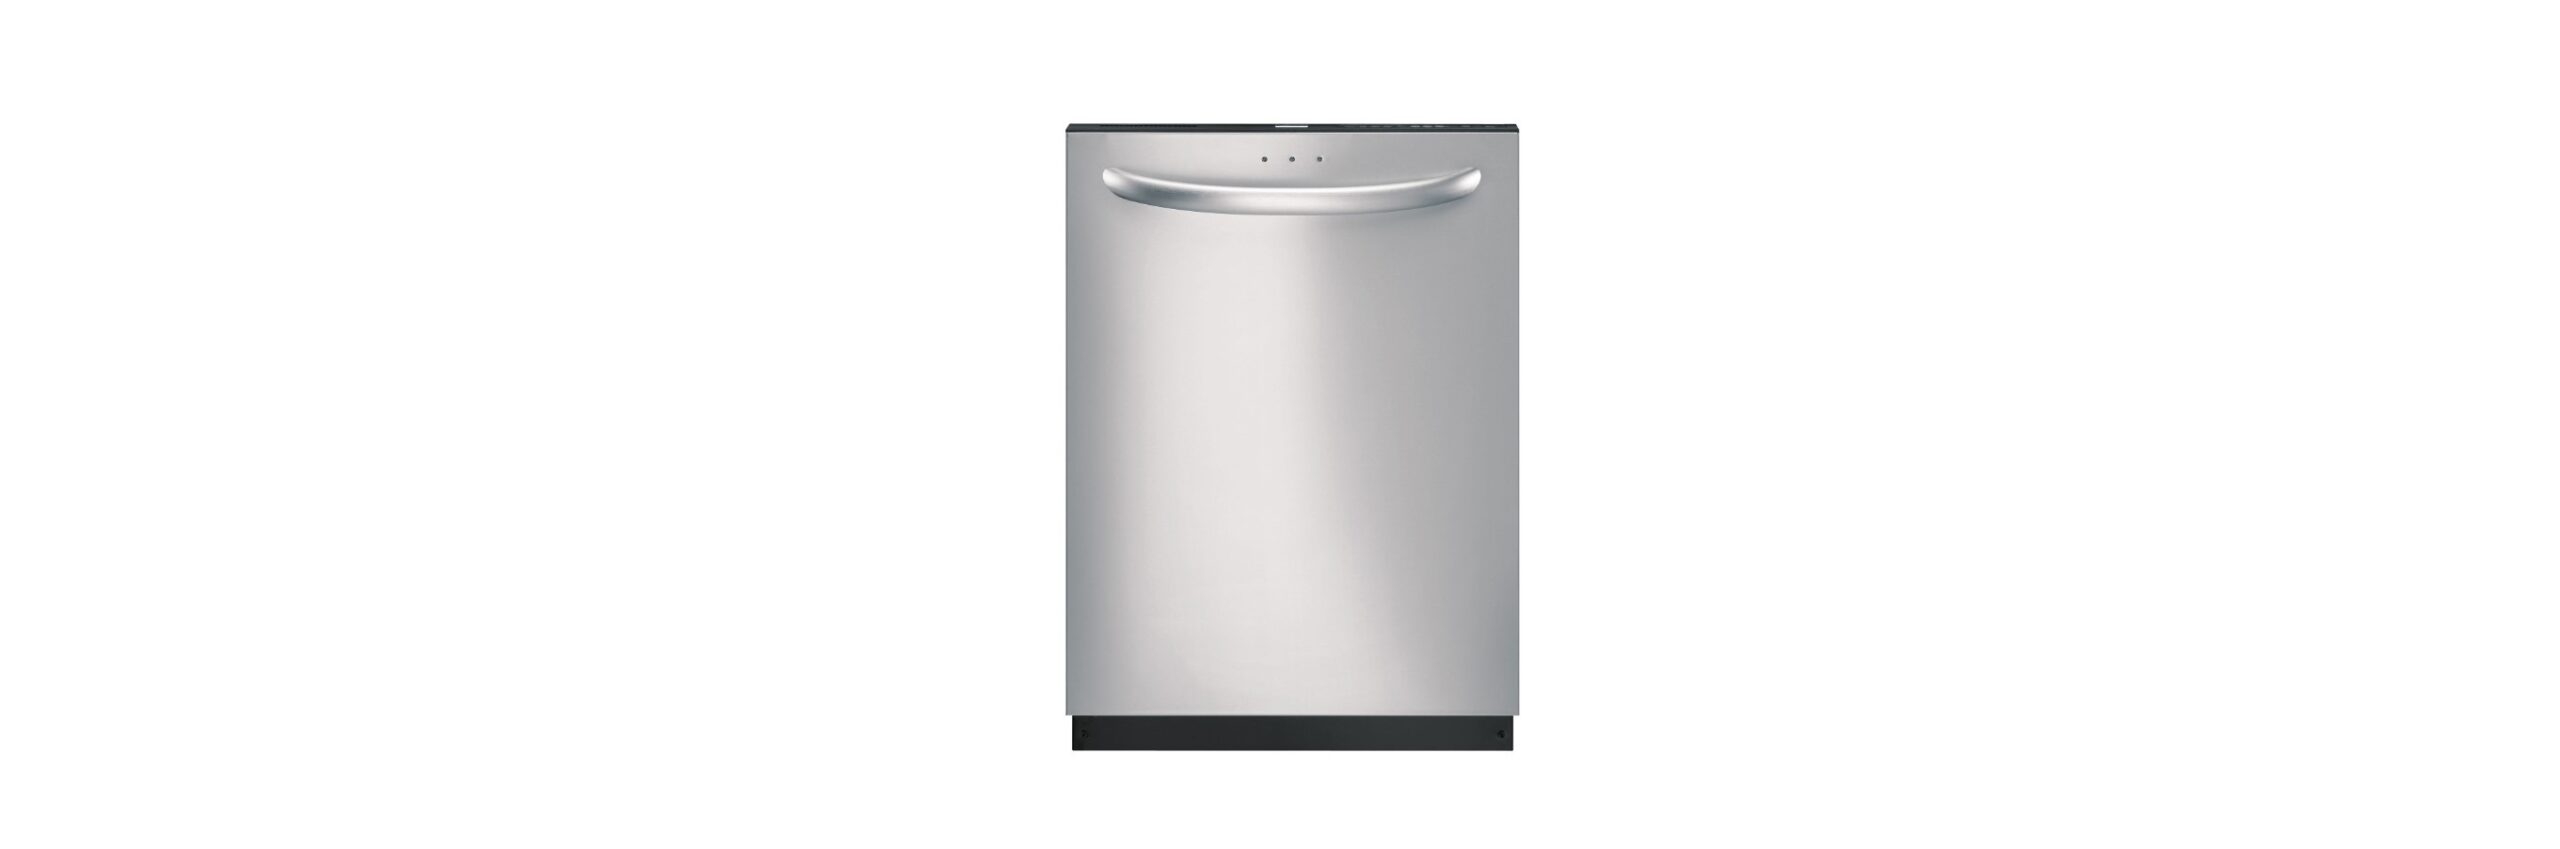 Kenmore ULTRA WASH 665.15839 Featured